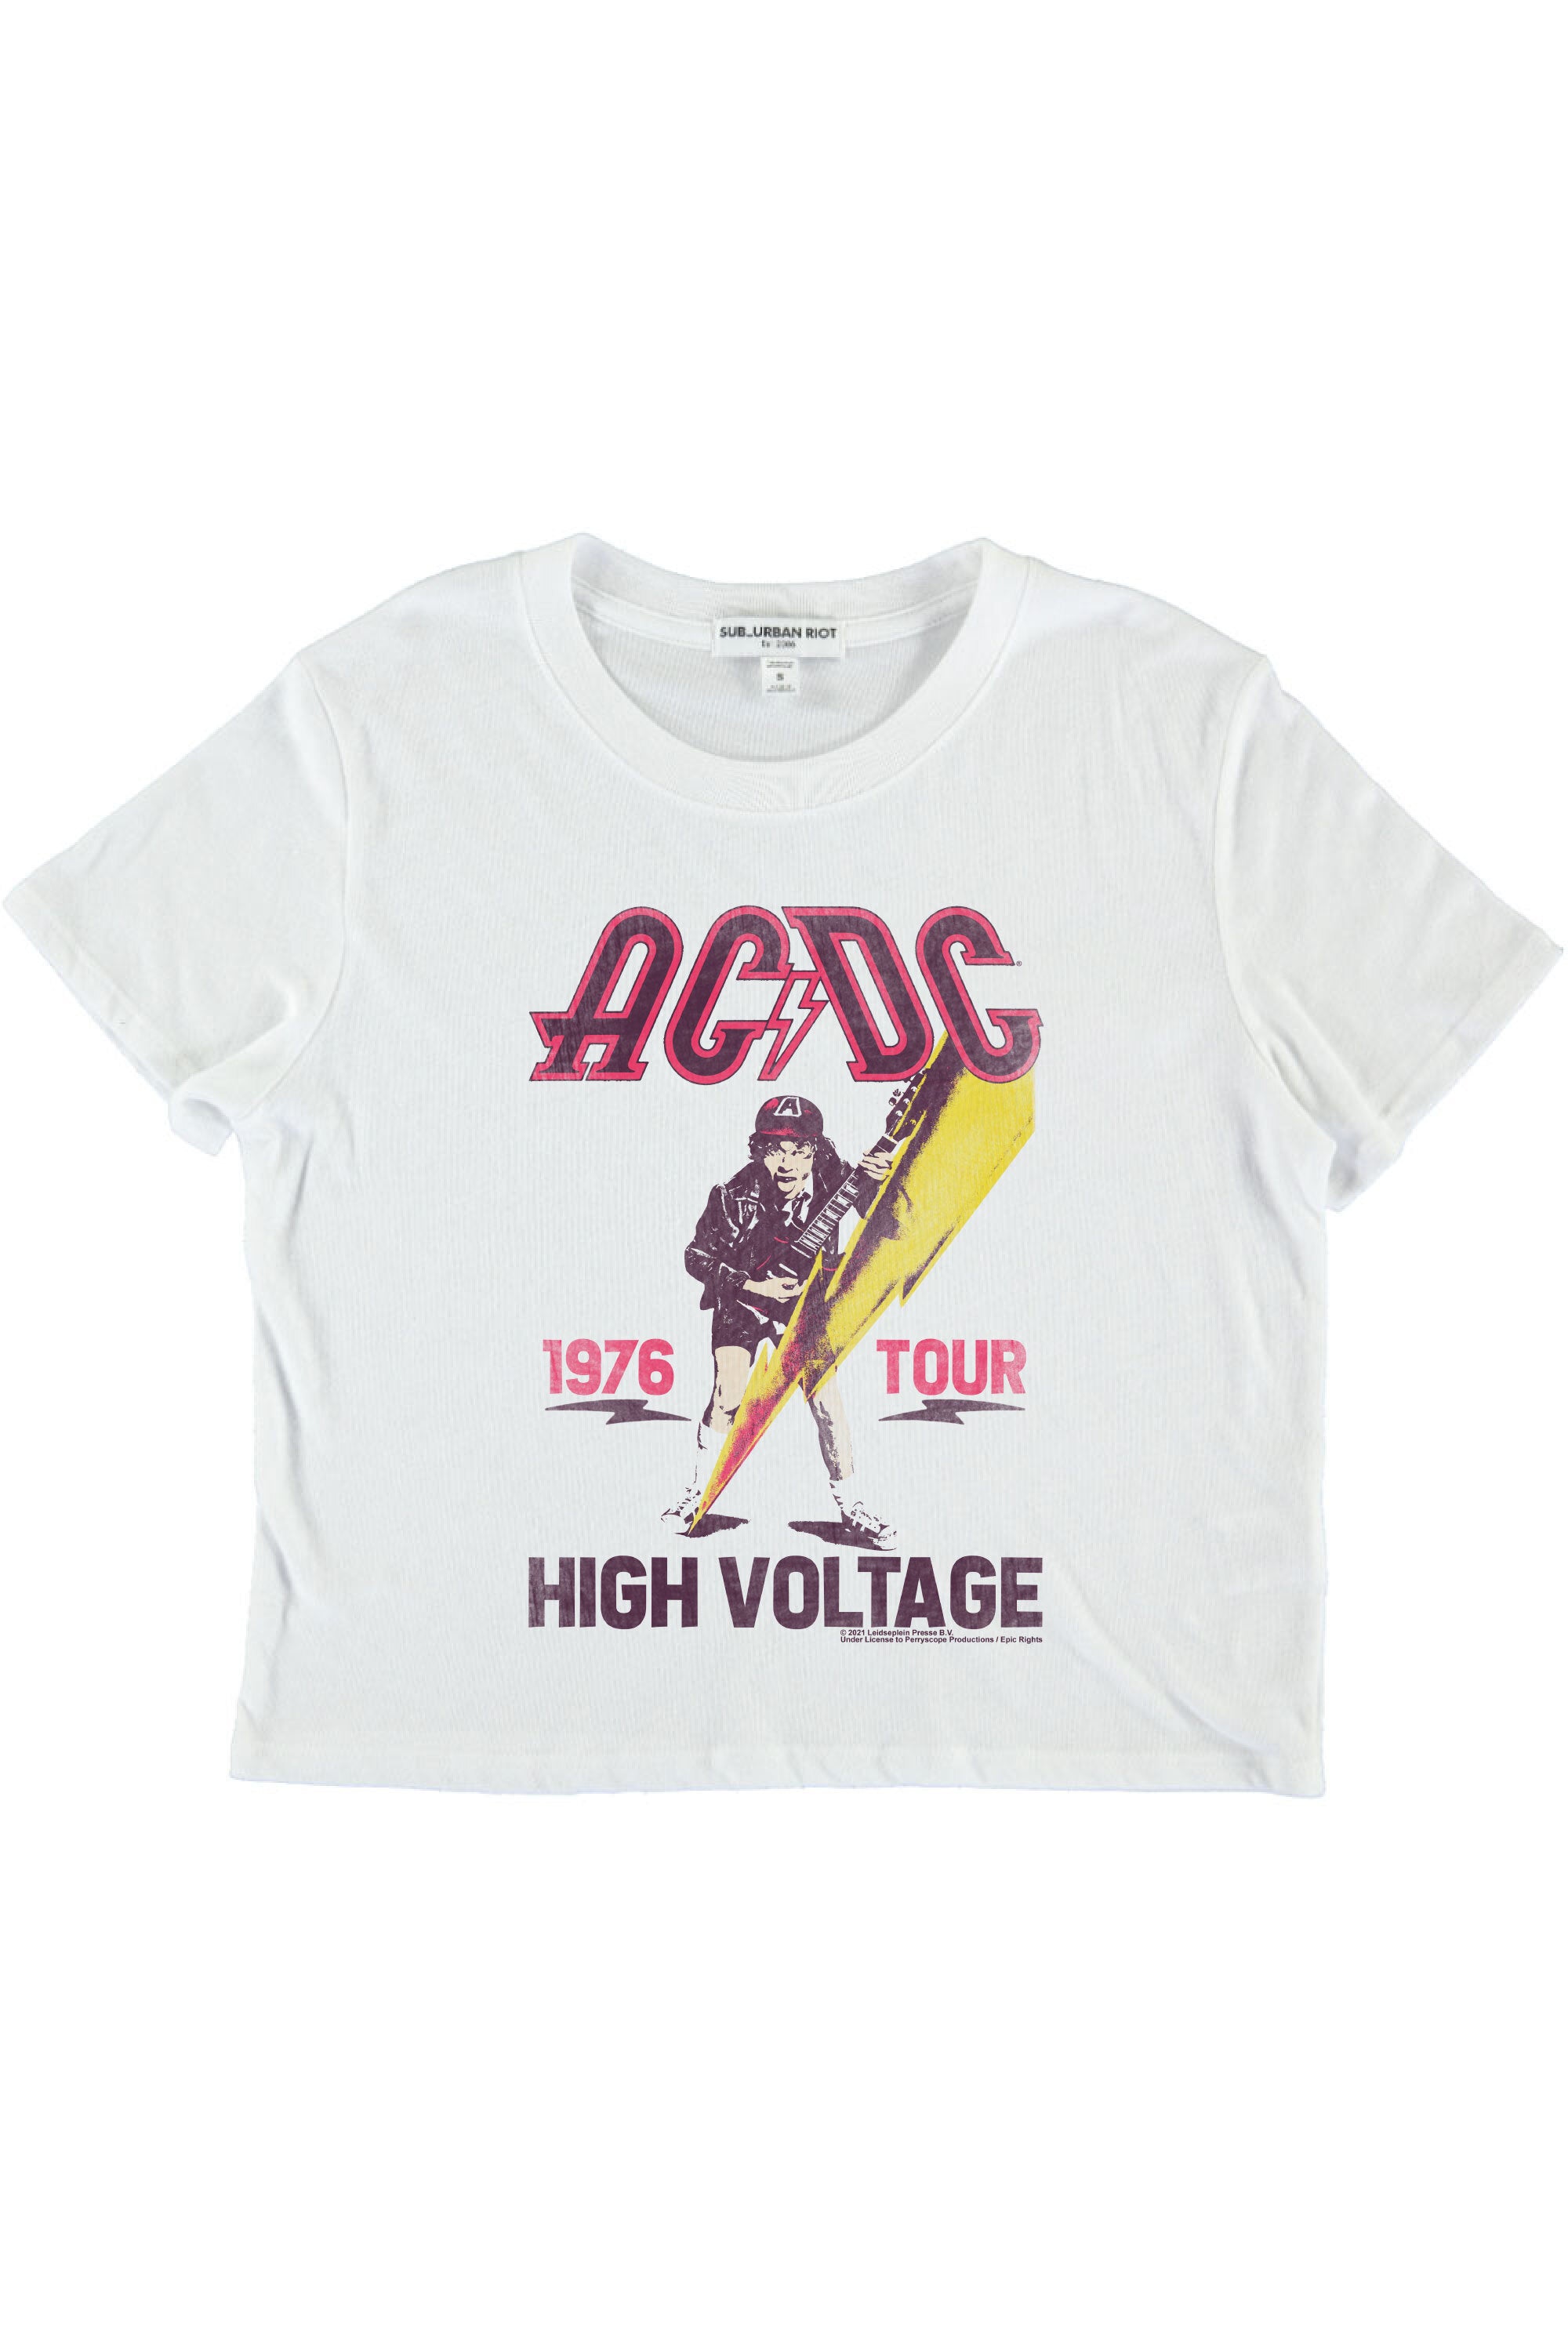 ACDC HIGH VOLTAGE YOUTH SIZE CROP TEE